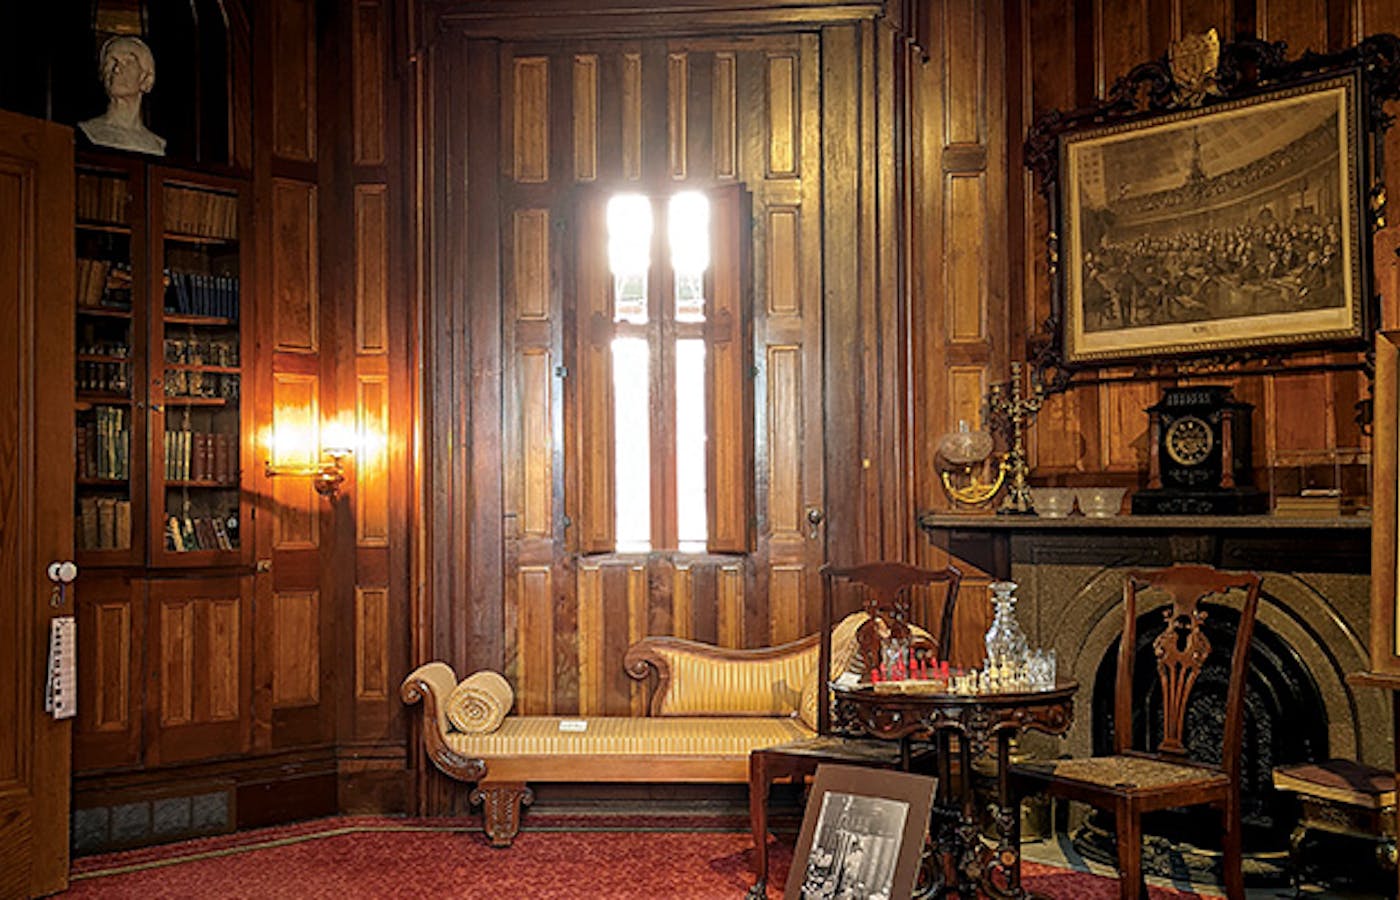 Interior of The Henry Clay Estate in Lexington, Kentucky (photo courtesy of The Henry Clay Estate)